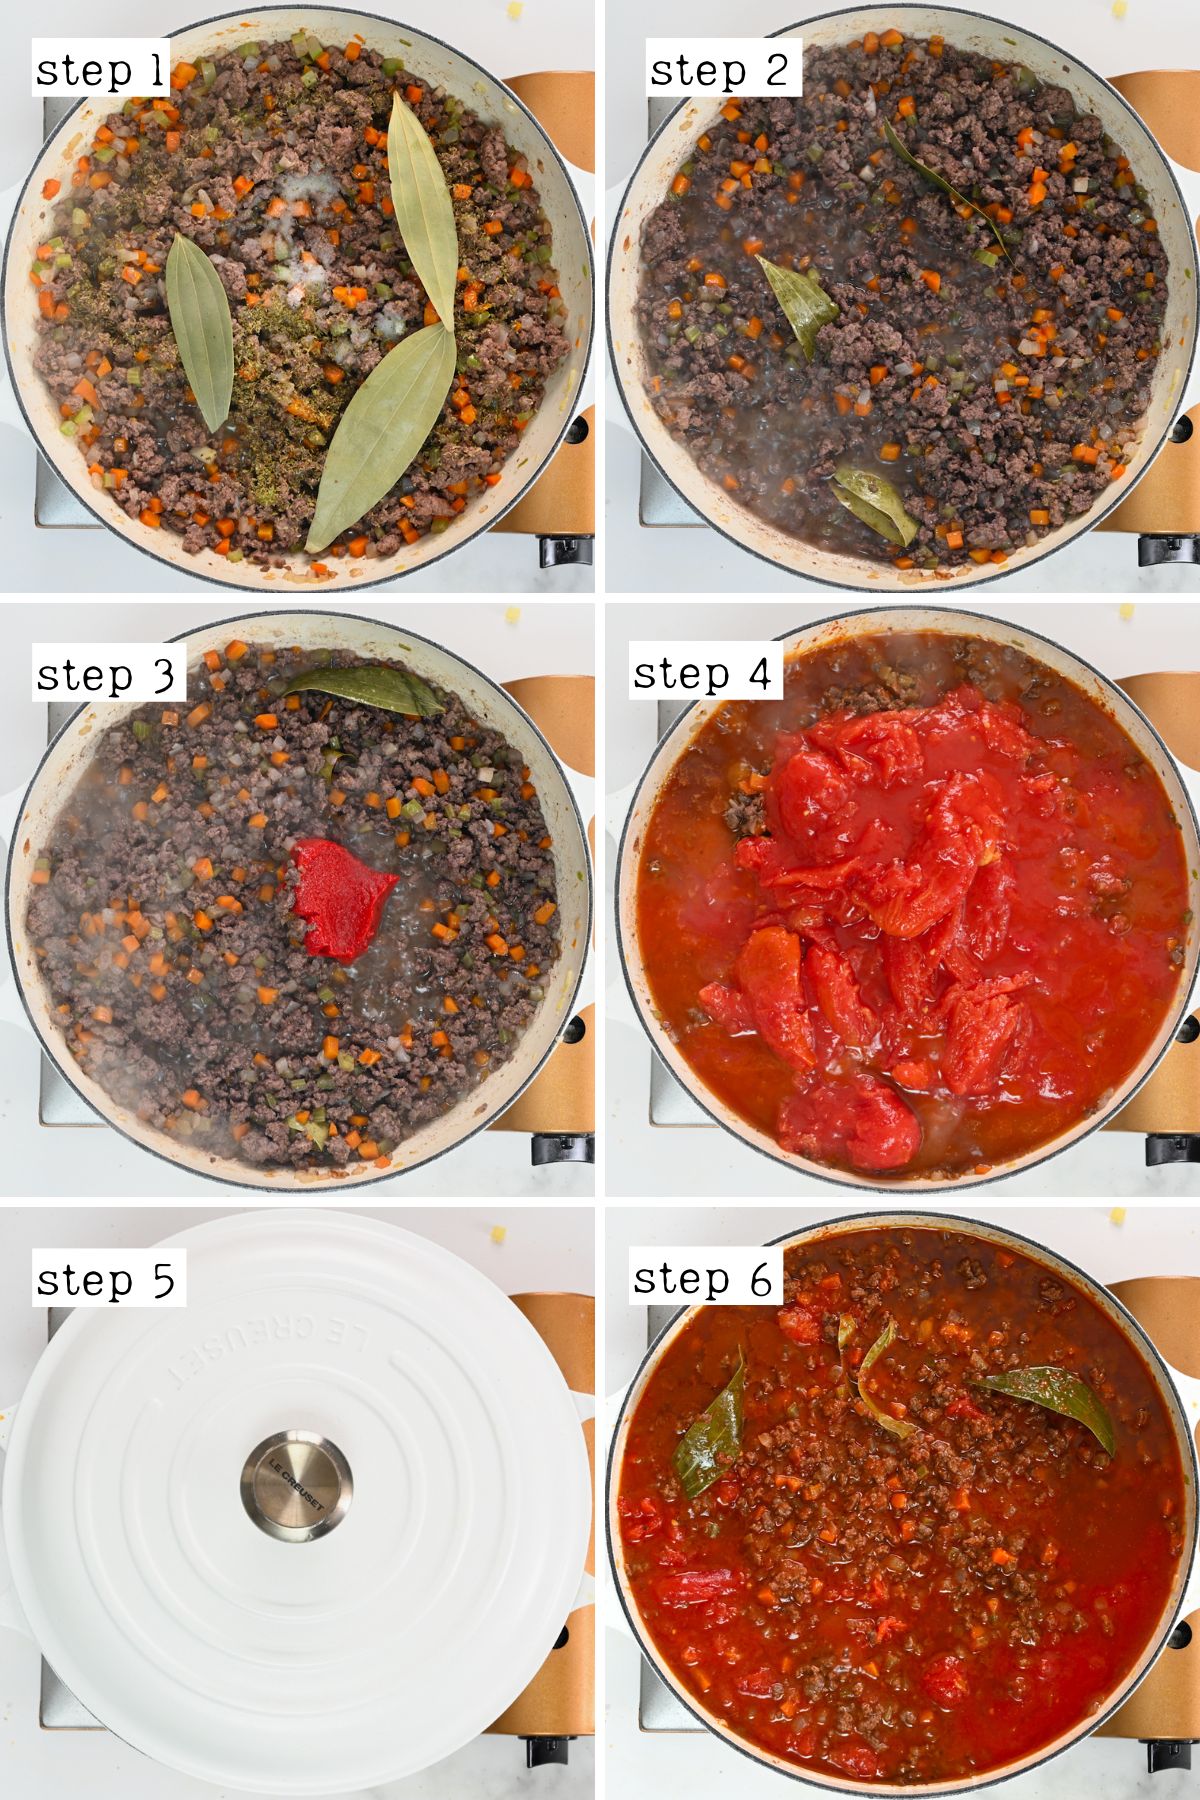 Steps for cooking spaghetti sauce